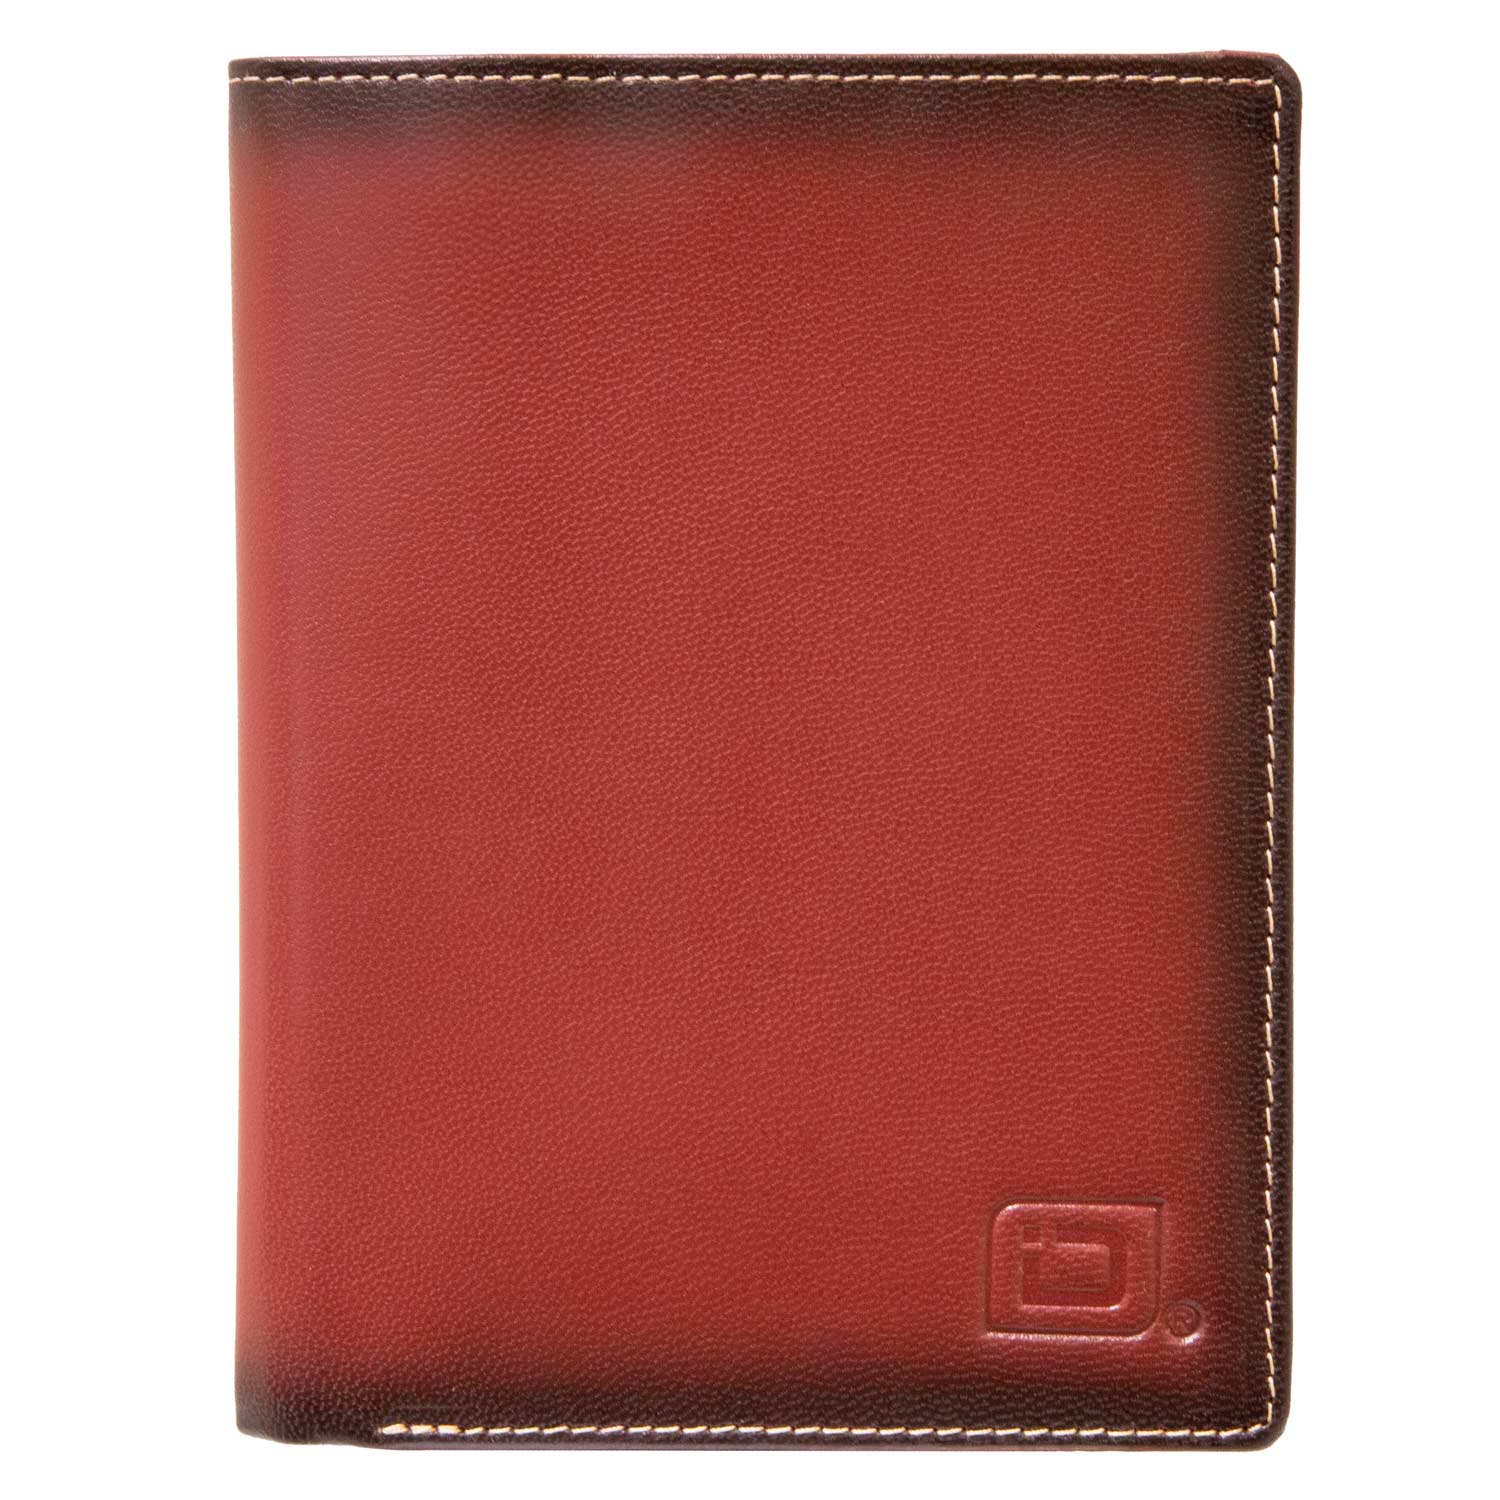 RFID Blocking Leather Passport Wallet - Red - Closed